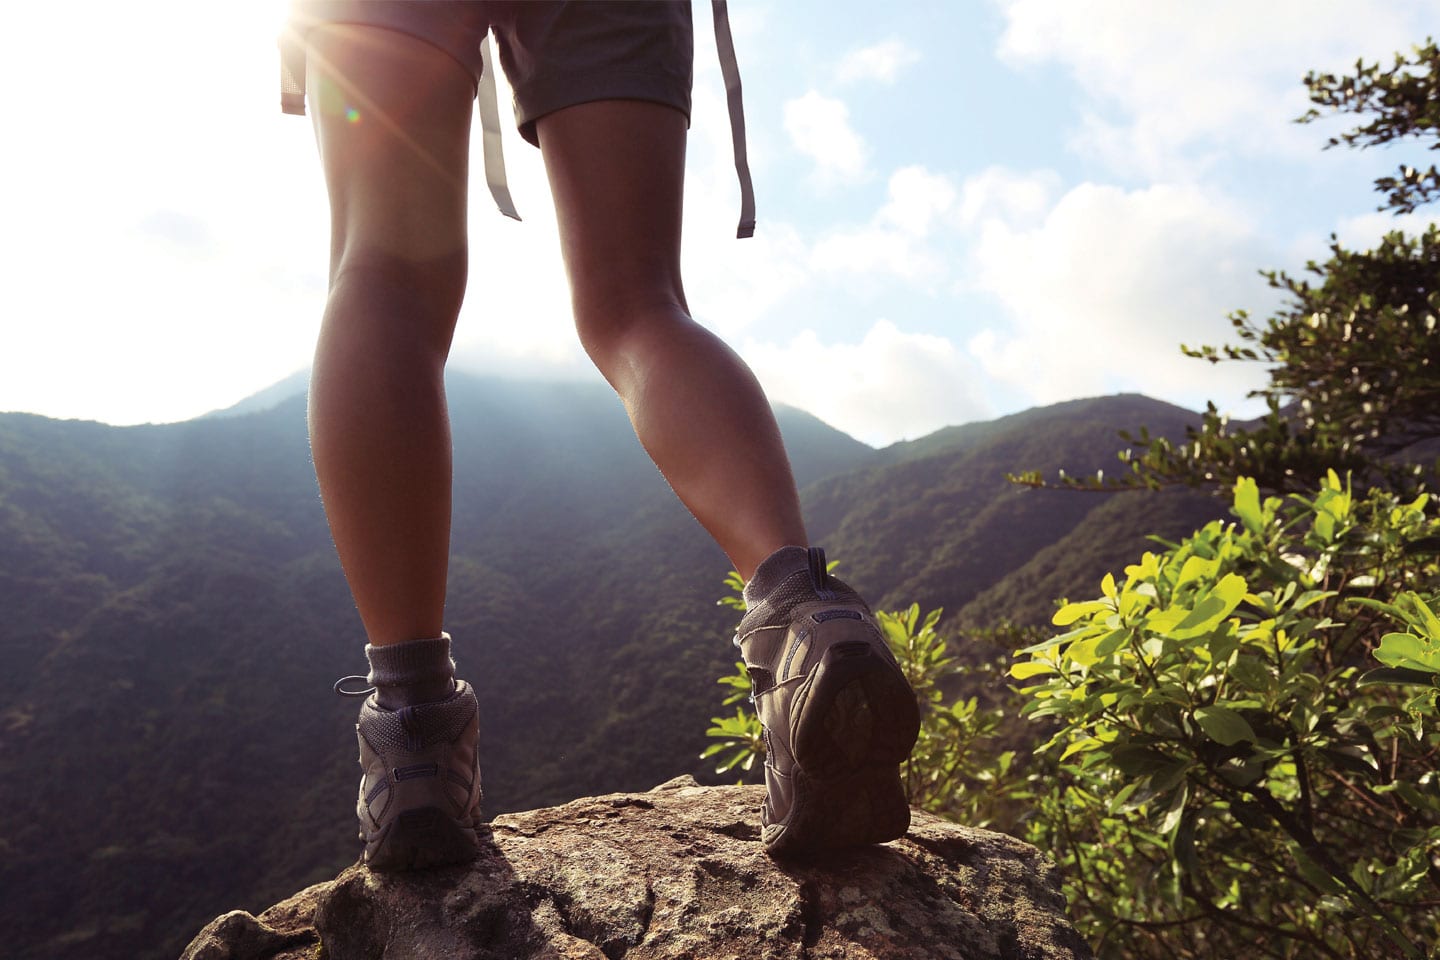 Low shot of person's legs in hiking boots with the view in front of them being that of a series of rolling hills